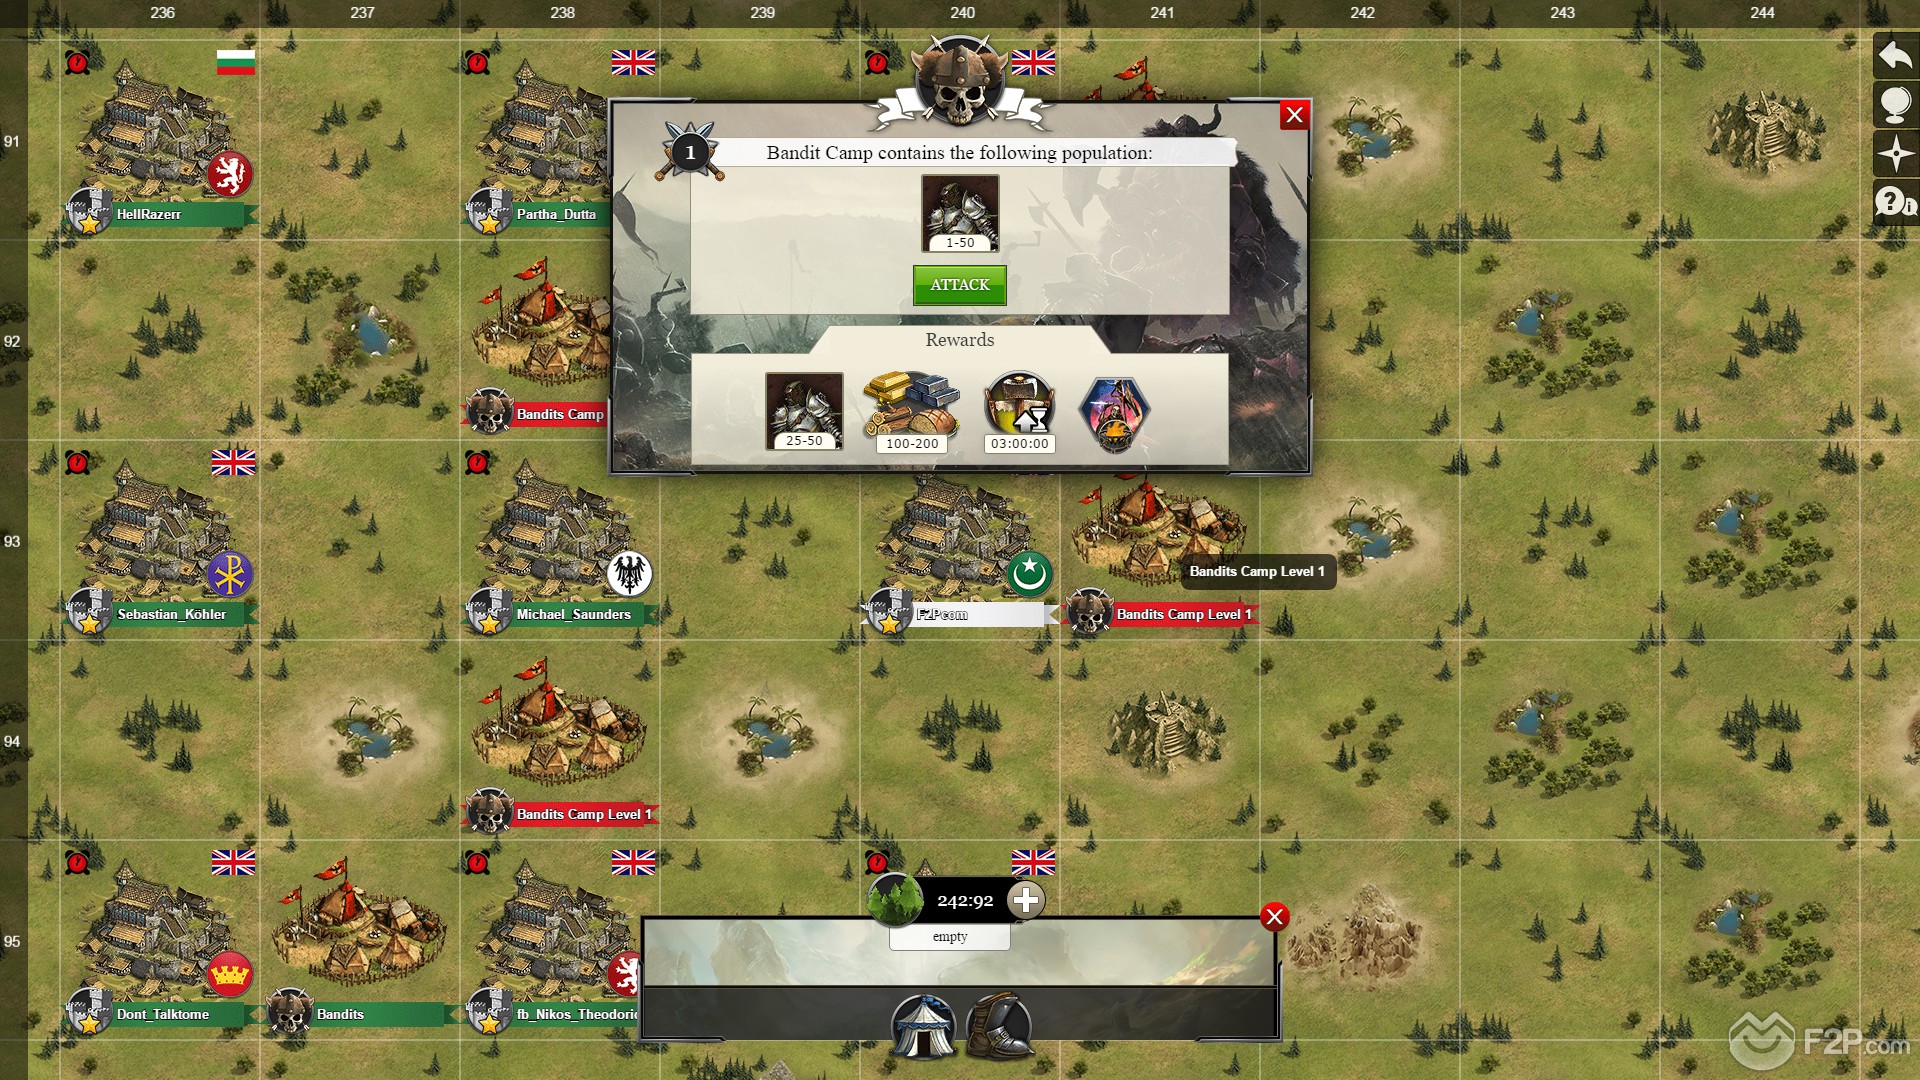 KHAN WARS: The best online strategy game!